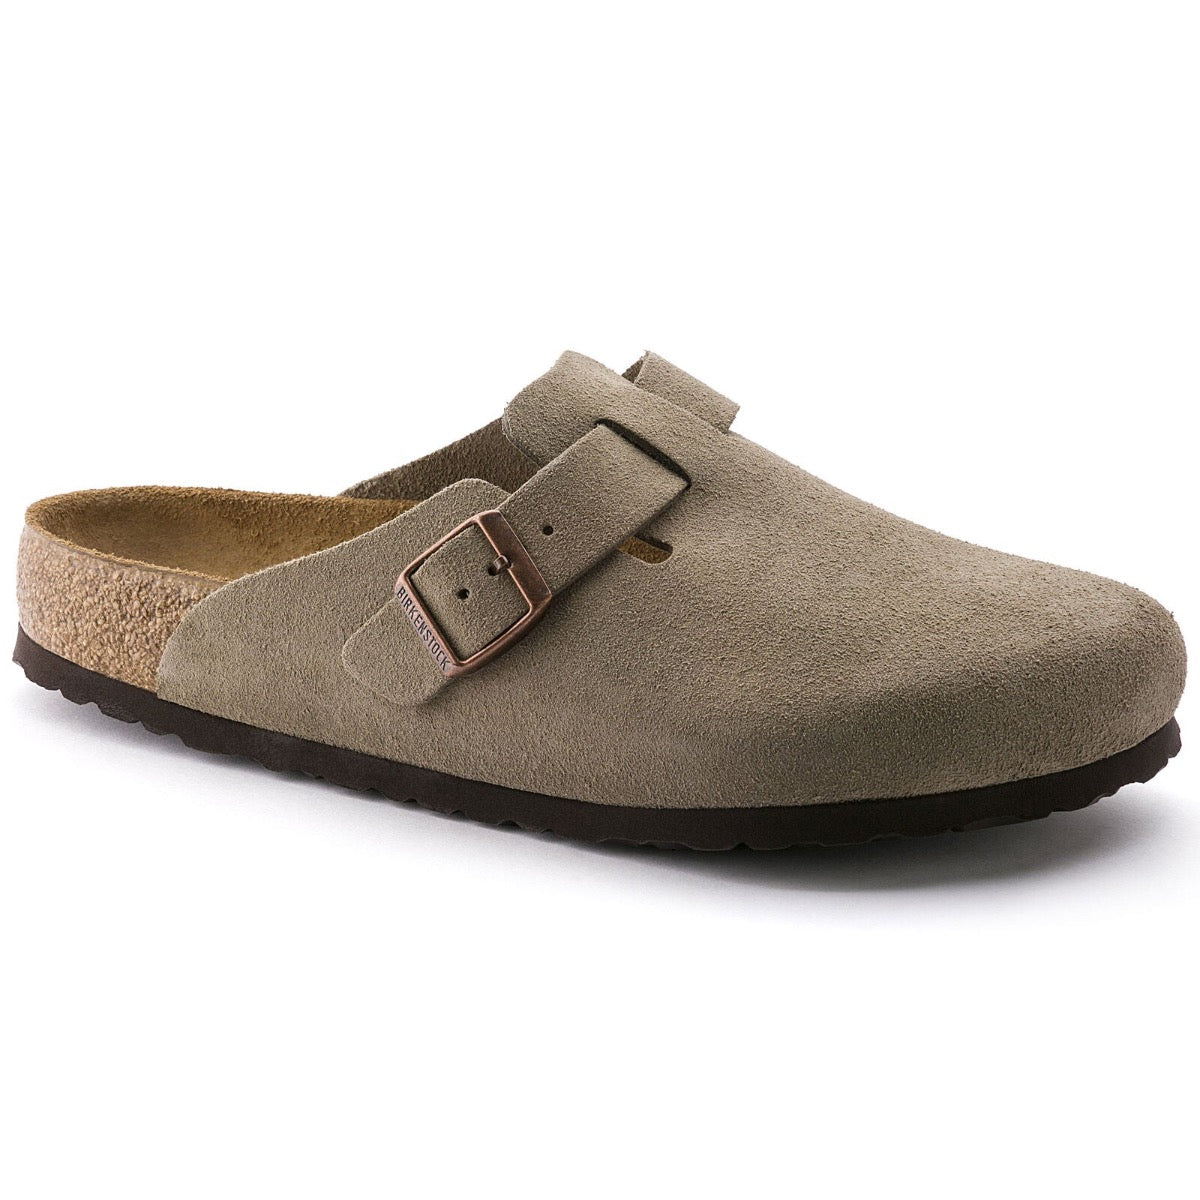 Birkenstock, Boston Soft Footbed Suede Leather, Unisex, Taupe